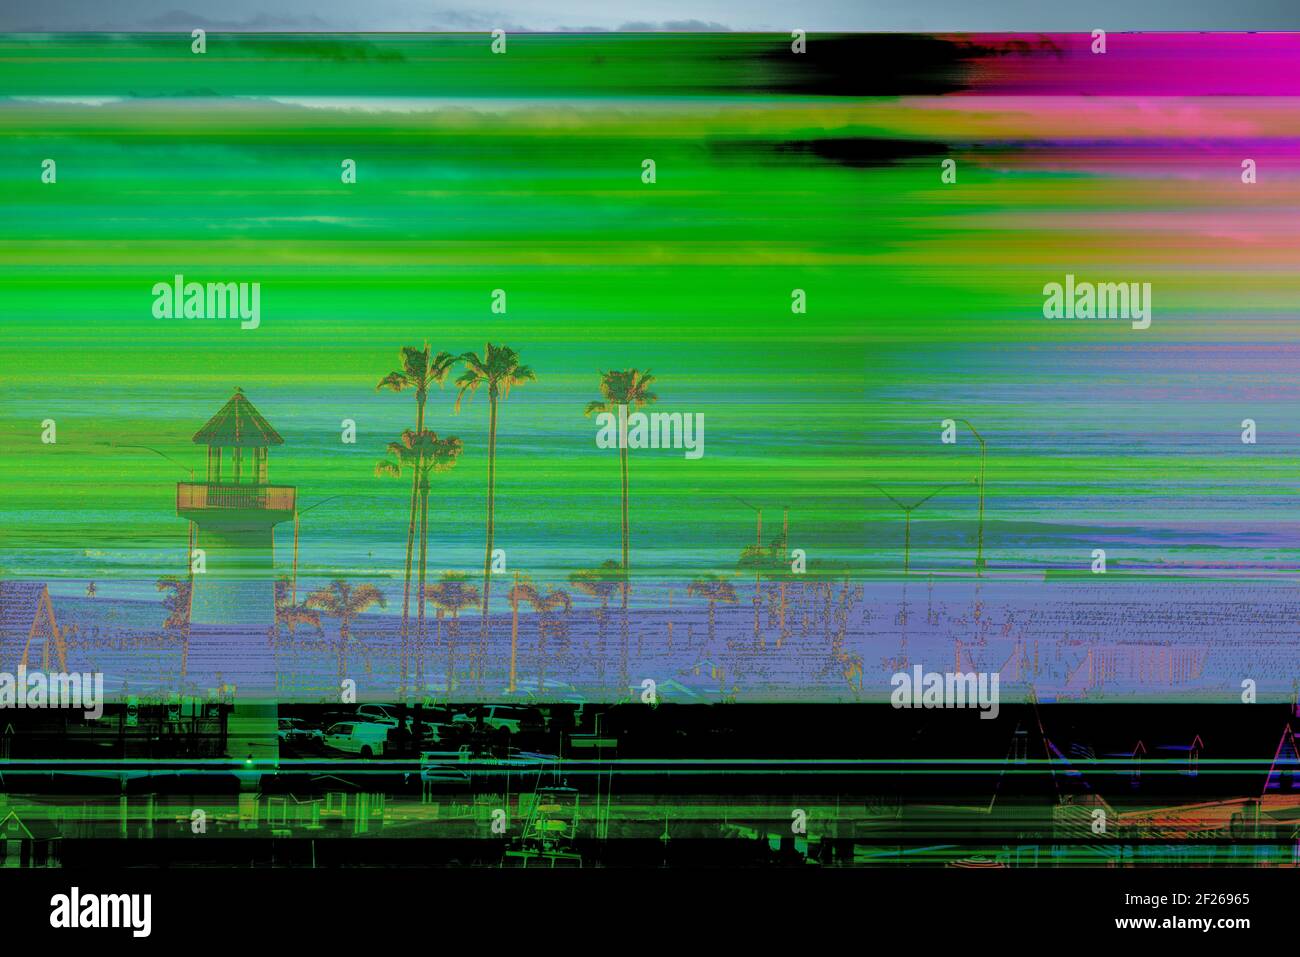 Corrupt digital image shows horizontal line, faded image with various colors. Stock Photo